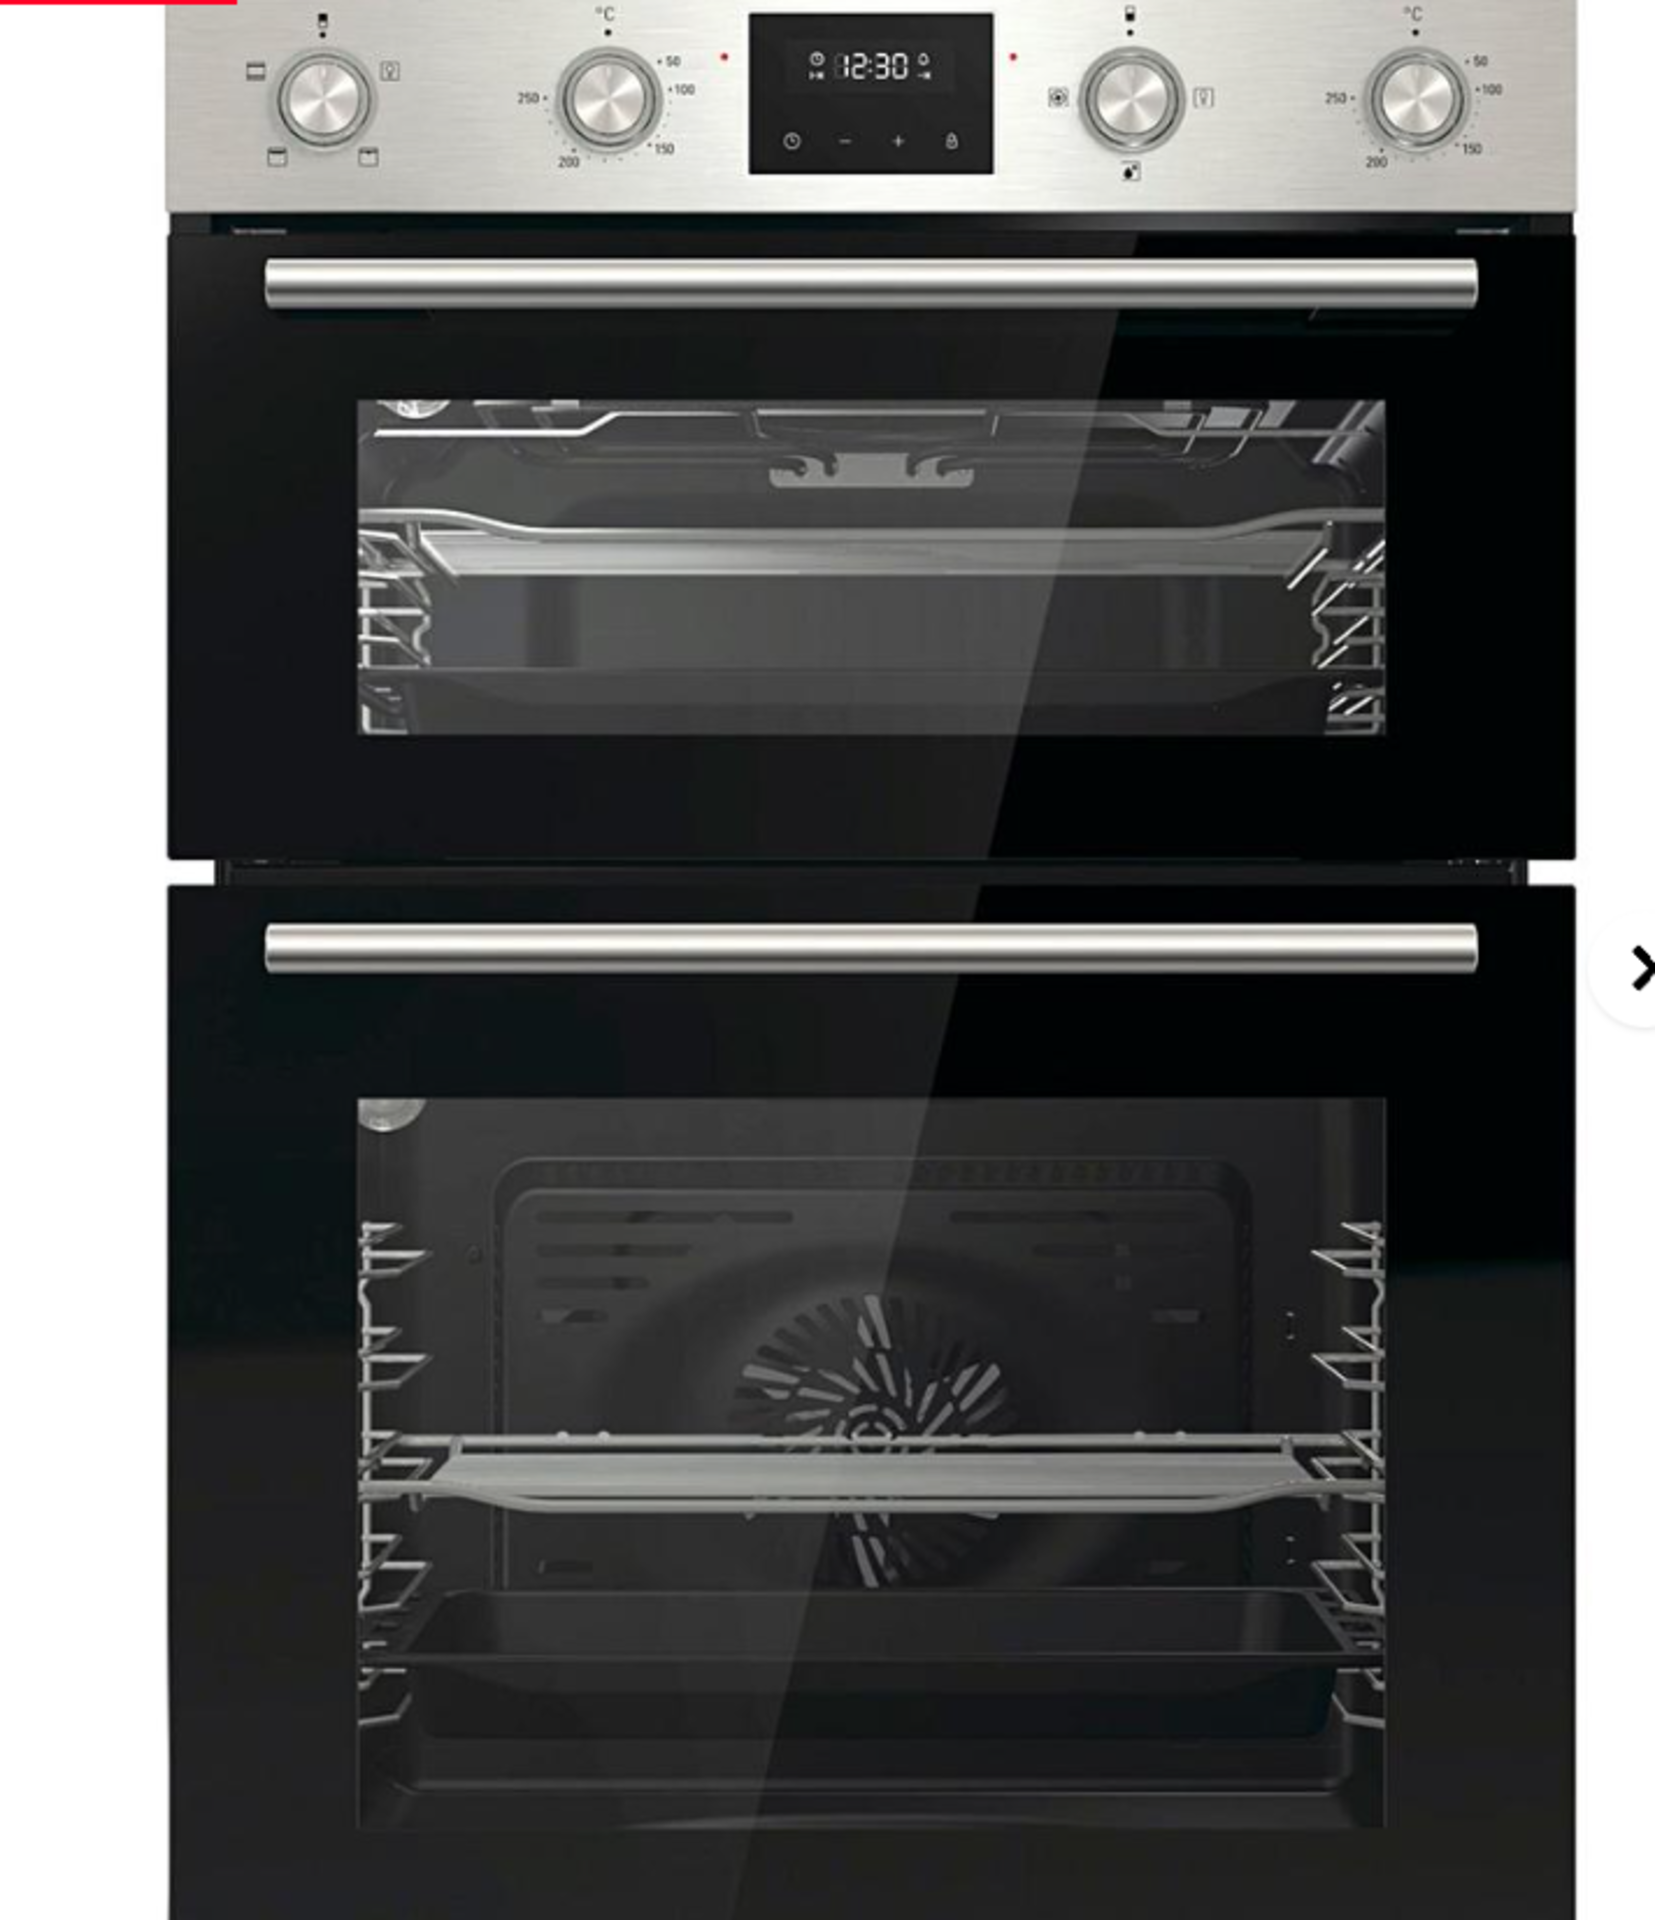 Hisense BID99222CXUK Built In Electric Double Oven - Stainless Steel. - ER20. RRP £499.99. The